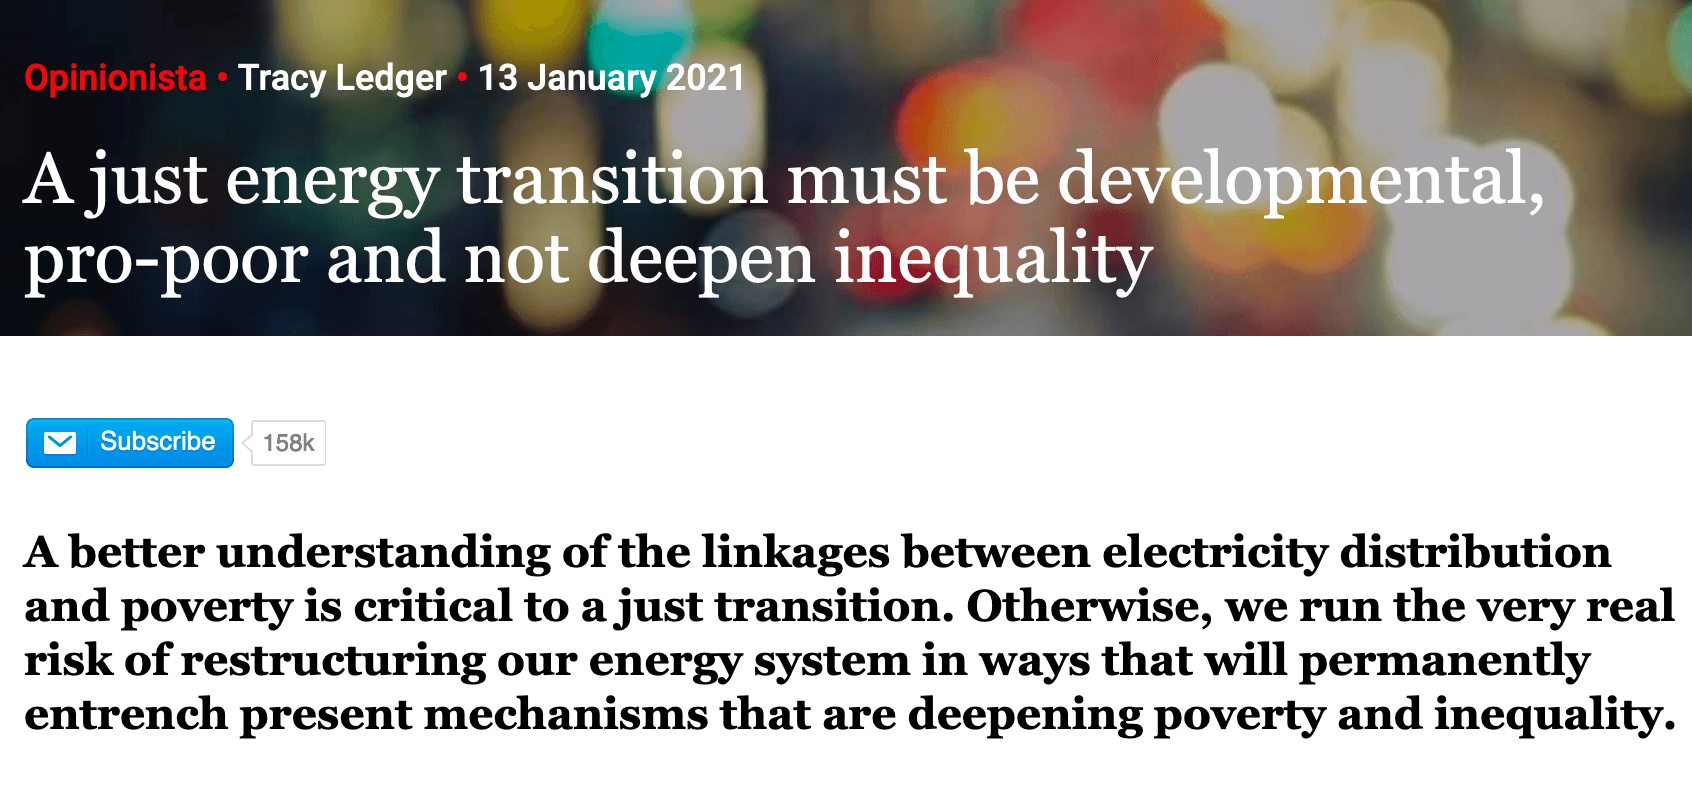 Op Ed | A just energy transition must be developmental, pro-poor and not deepen inequality